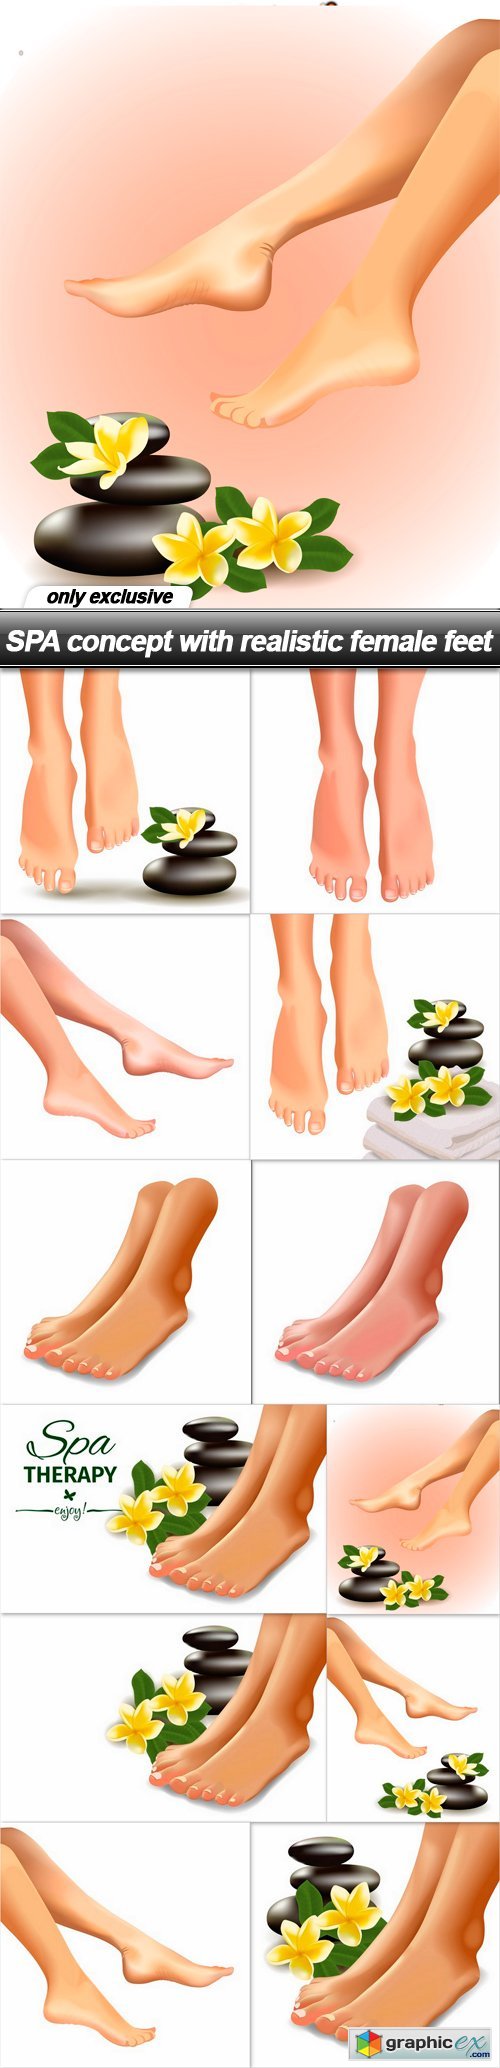 SPA concept with realistic female feet - 12 EPS